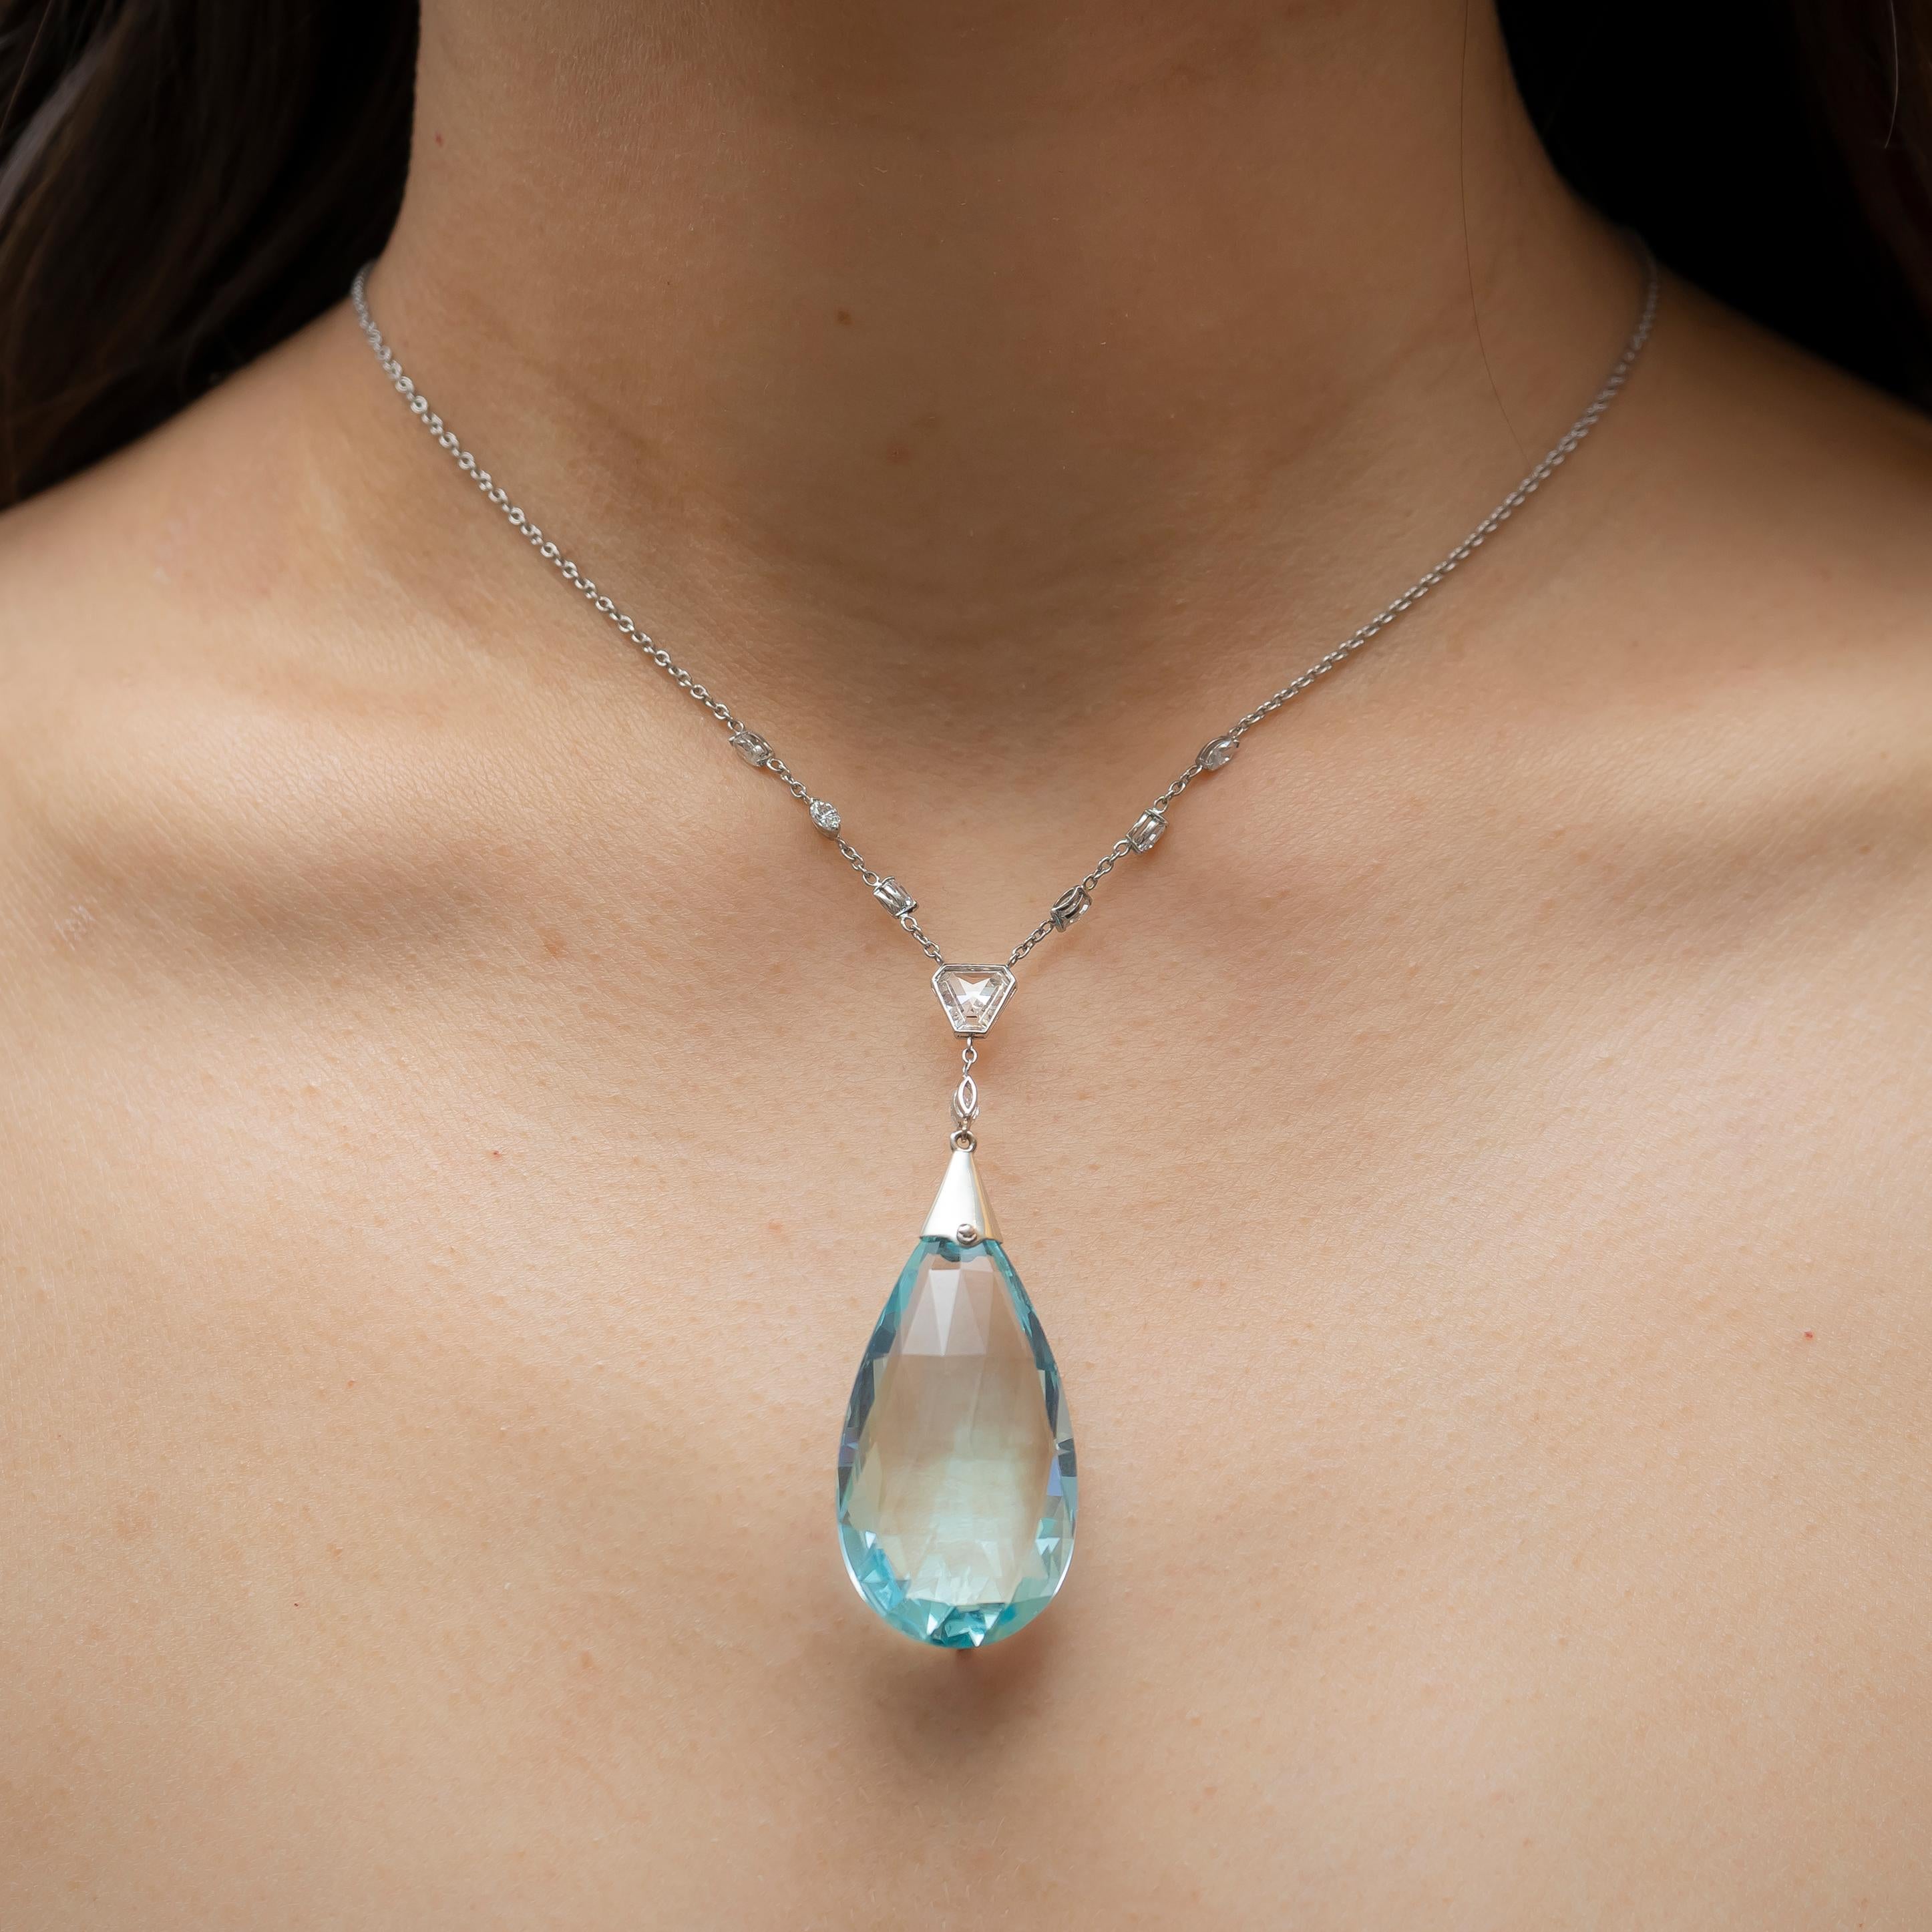 An aquamarine and diamond pendant with a drop shape briollette-cut aquamarine, with a white gold cap, set with a rose-cut diamond, with millegrain decoration, suspended from a polygonal shaped diamond and a marquise-cut diamond, on a white gold